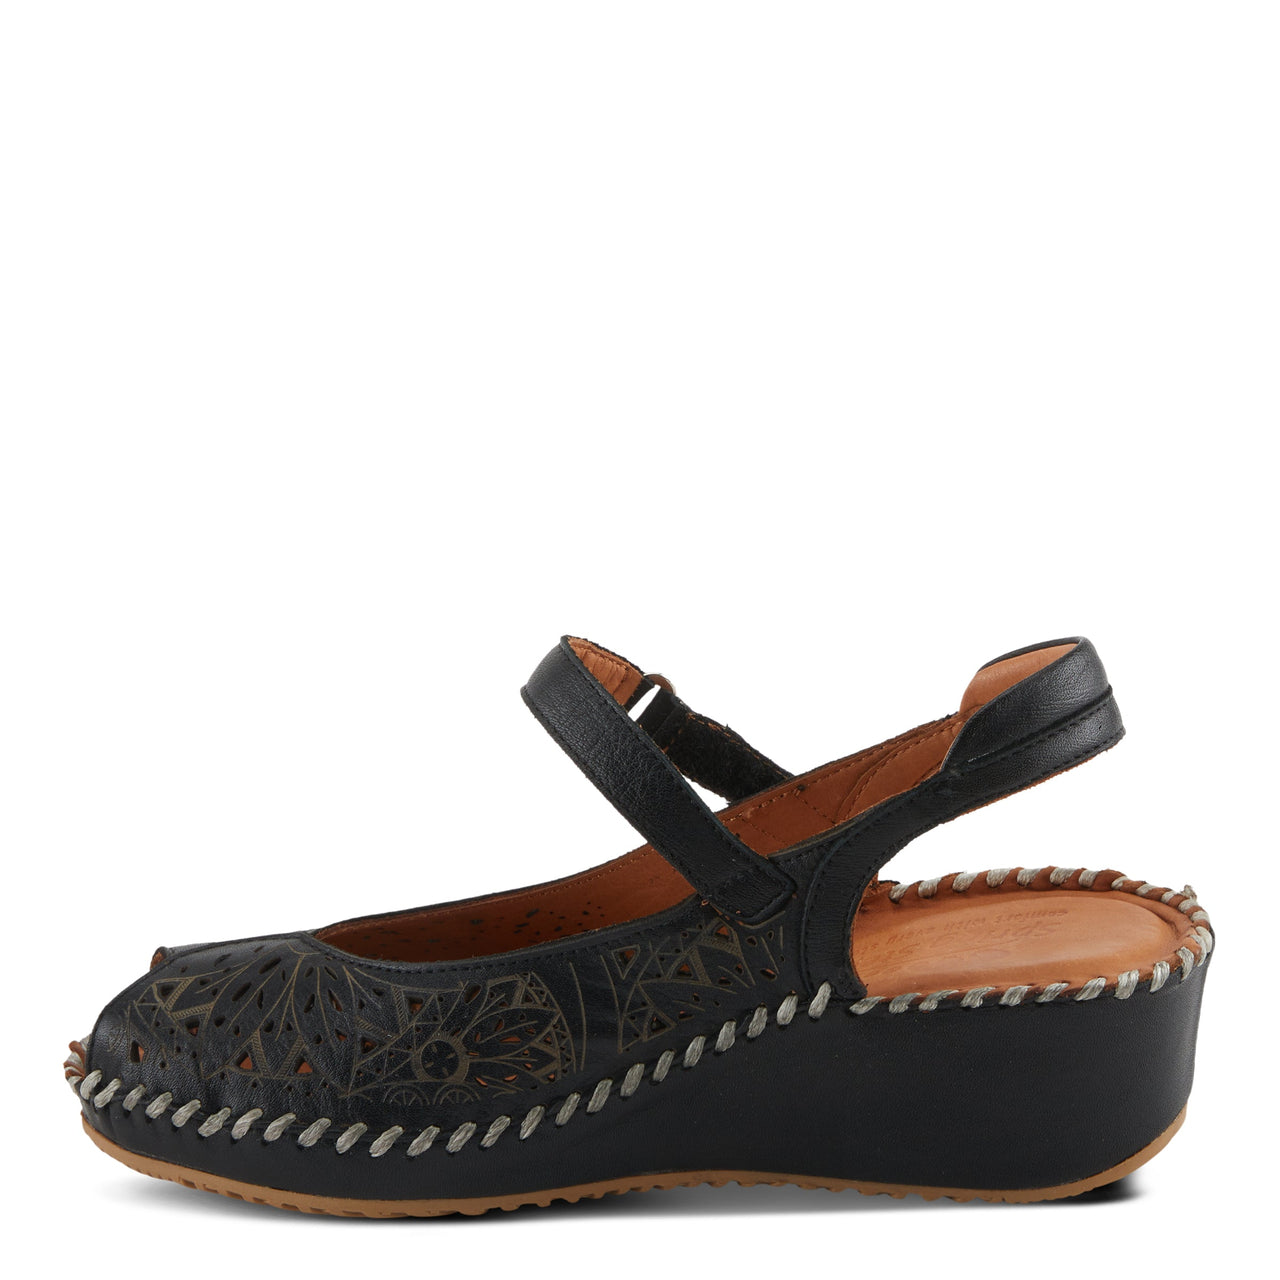 Spring Step Santonio Sandals with a cushioned insole for maximum comfort